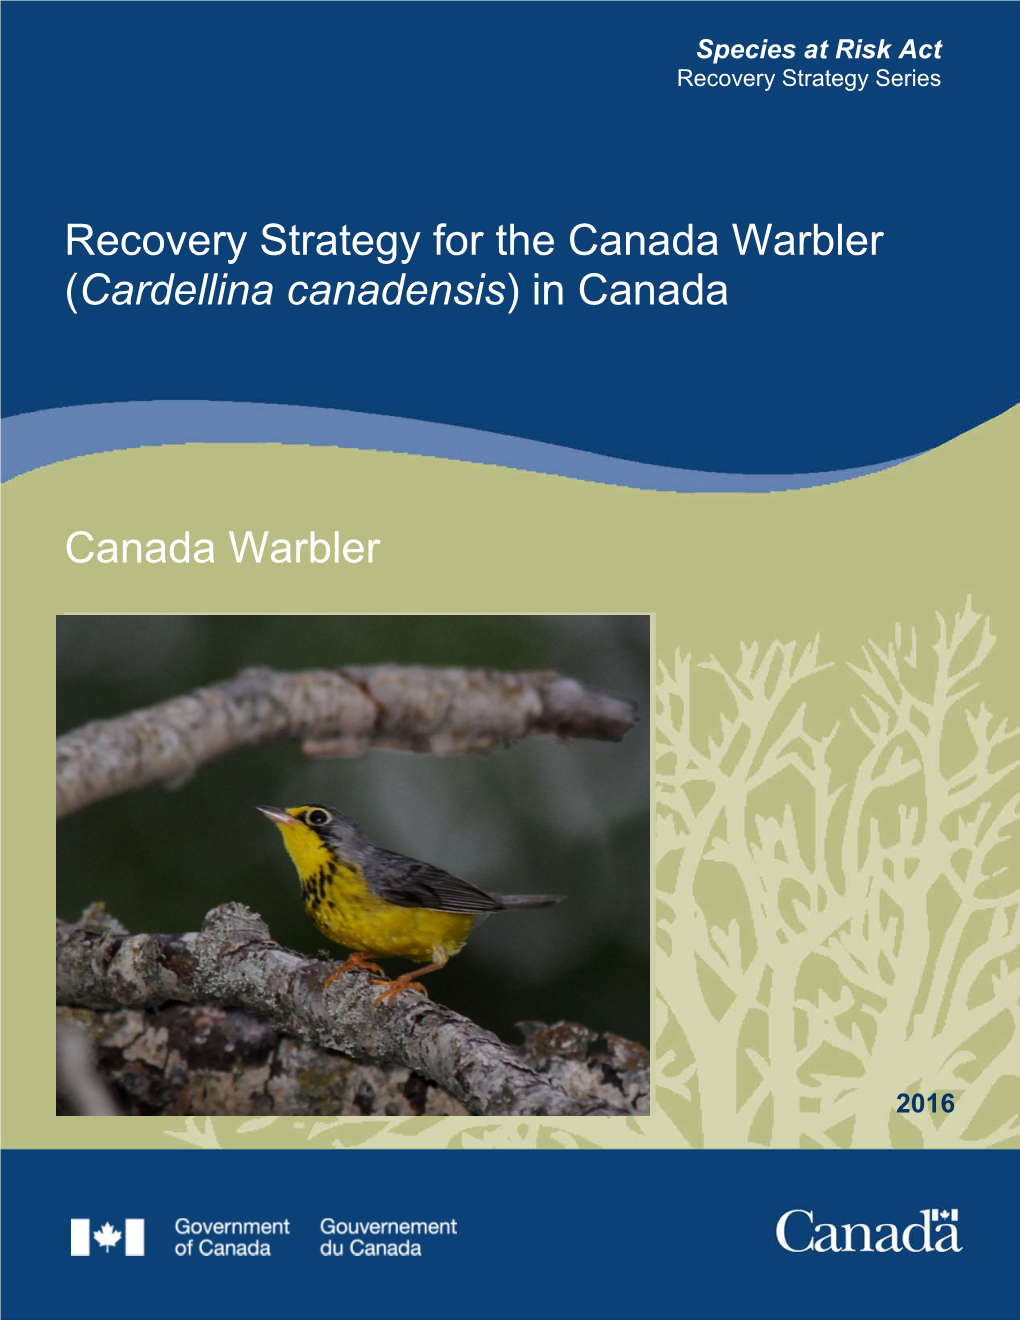 Recovery Strategy for the Canada Warbler (Cardellina Canadensis) in Canada